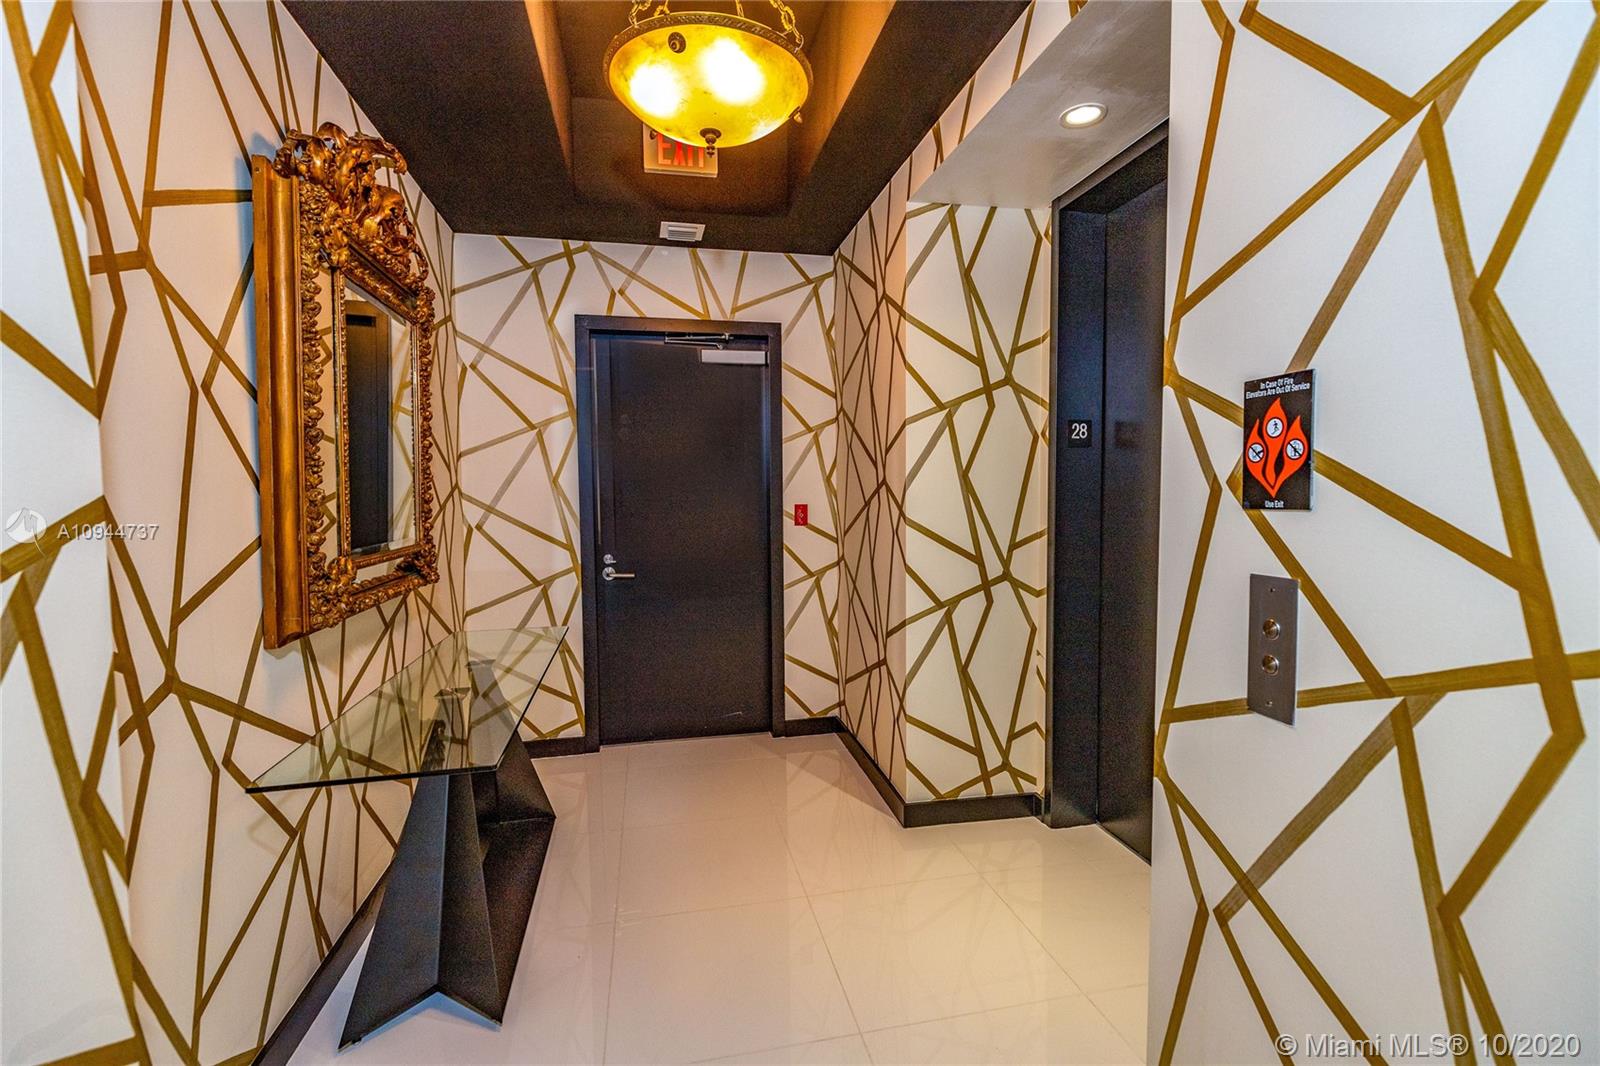 Step into your spacious enclosed foyer from your private elevator.